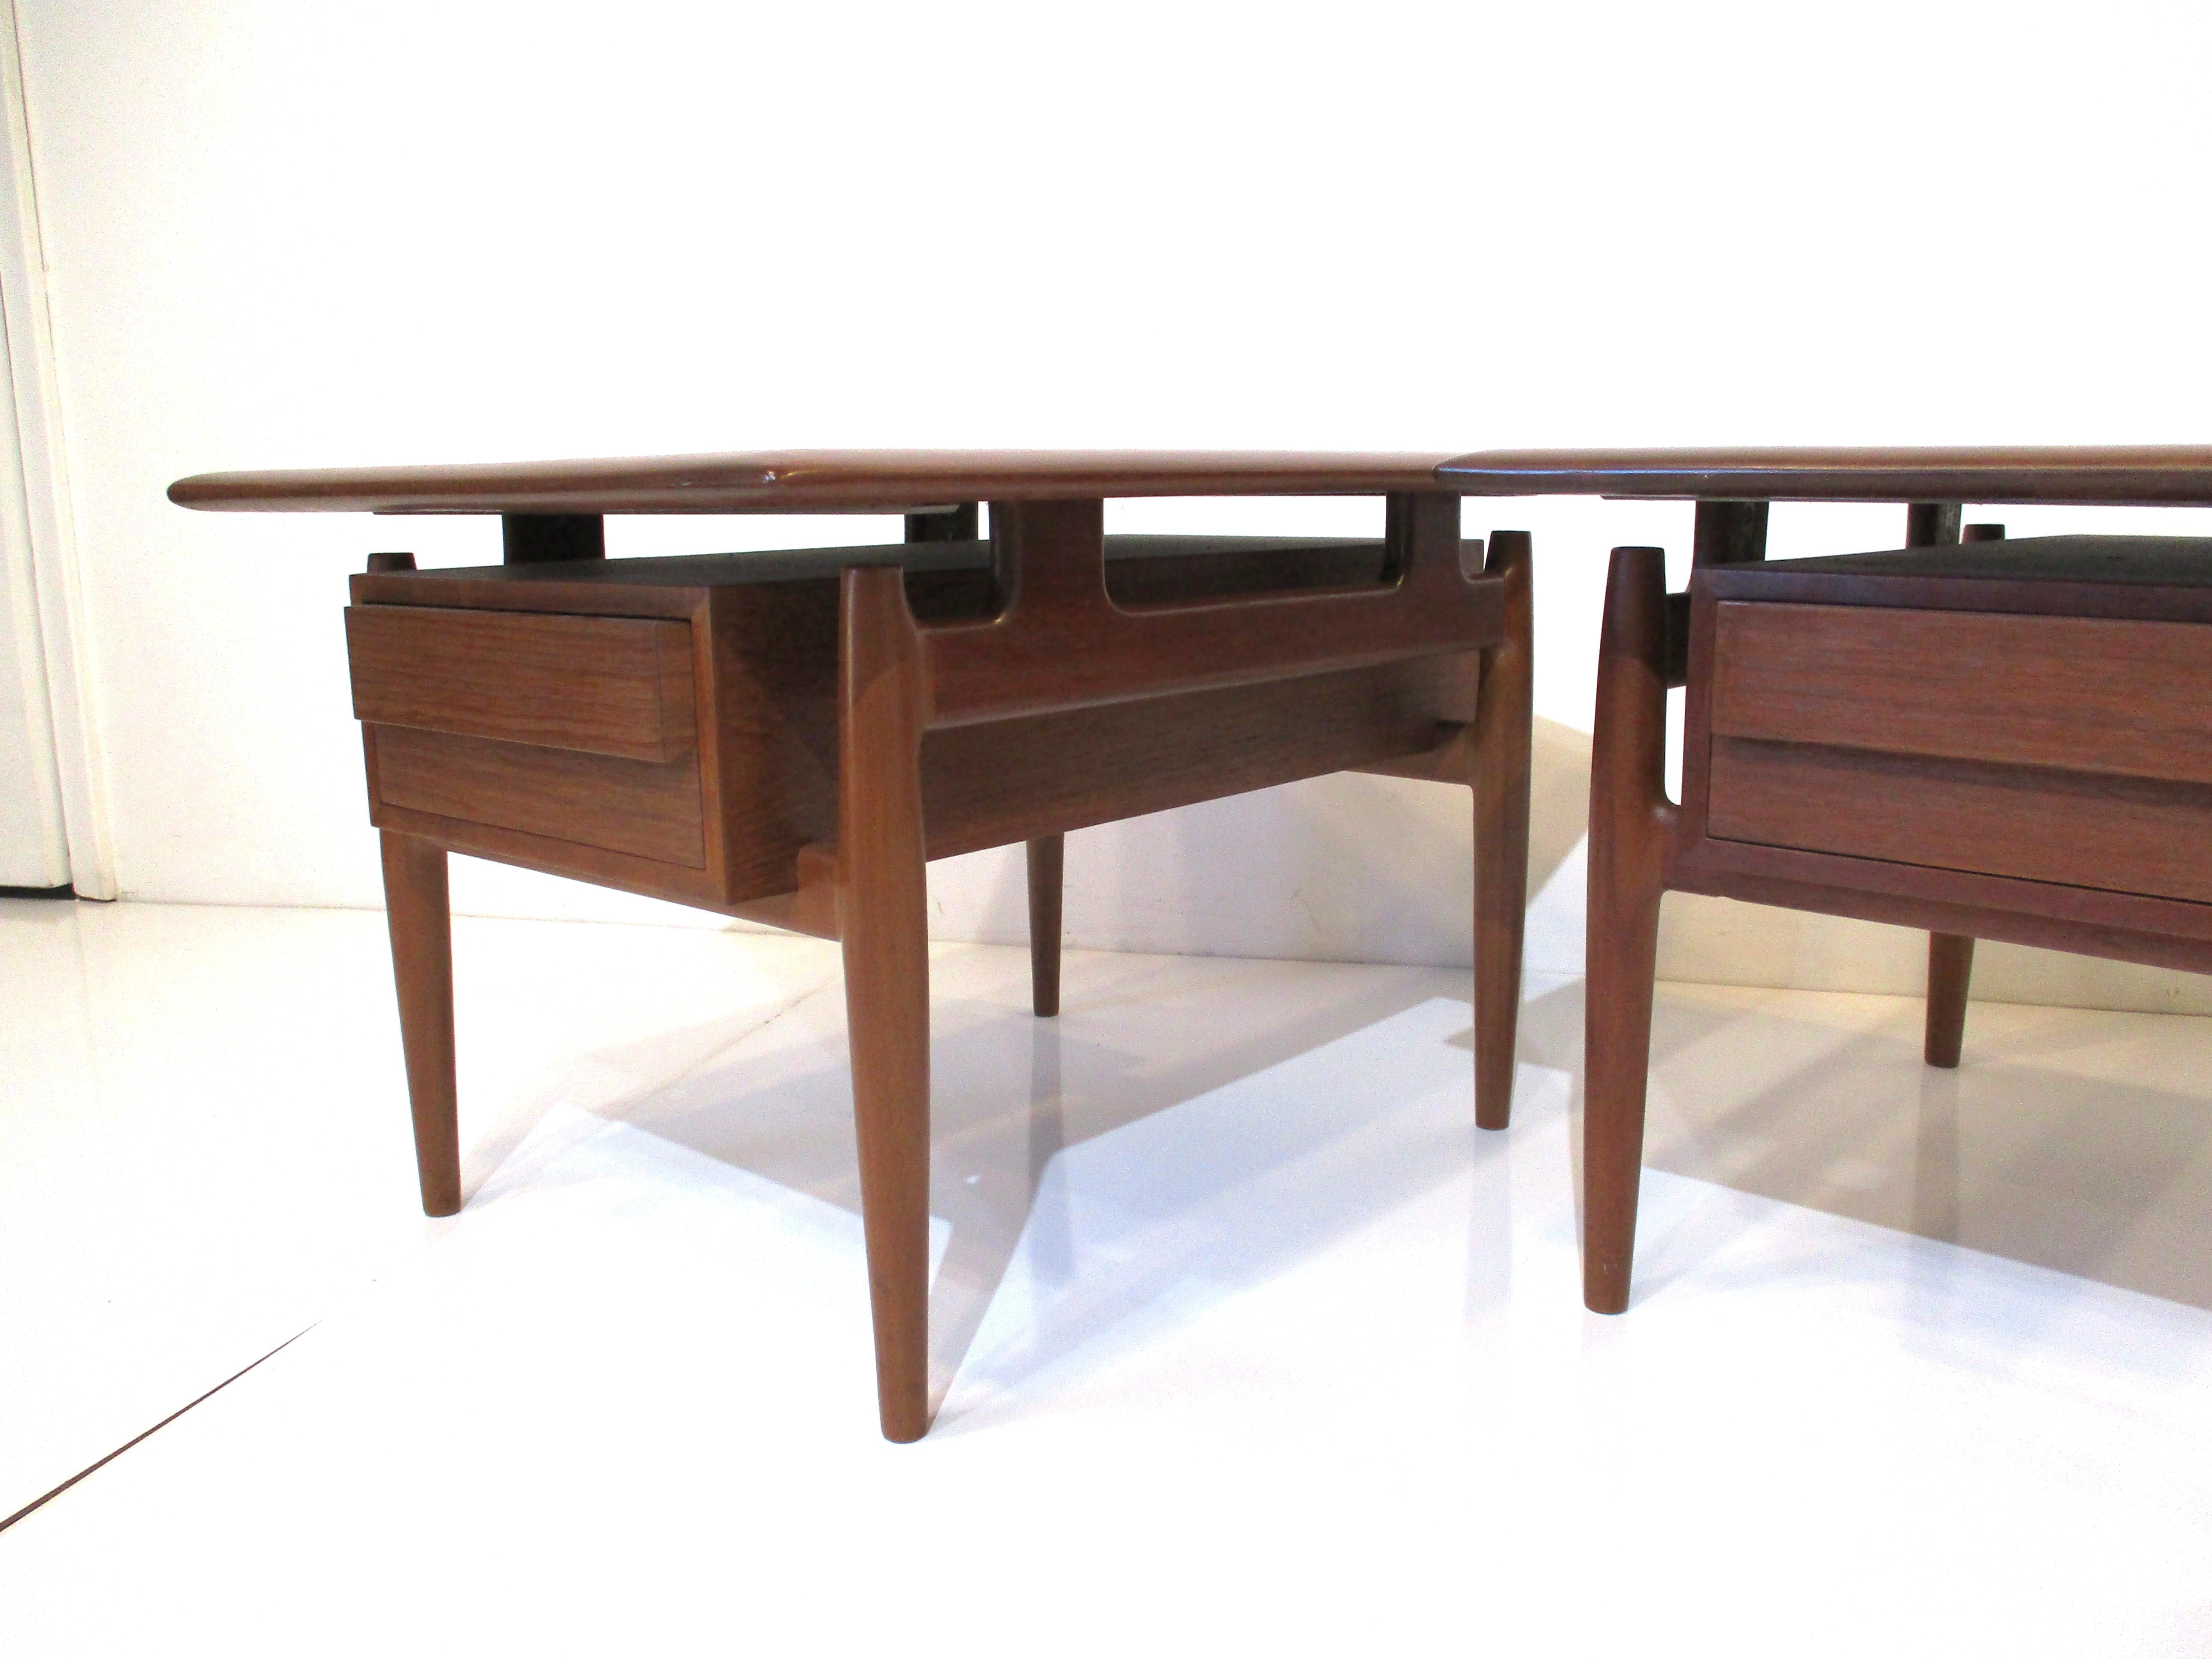 A pair of very well crafted teak side tables with floating top, single drawer to each with protruding beveled handle across the front of the drawers and open backside opposite the drawer for storage. The sculptural side mounted leg structure is